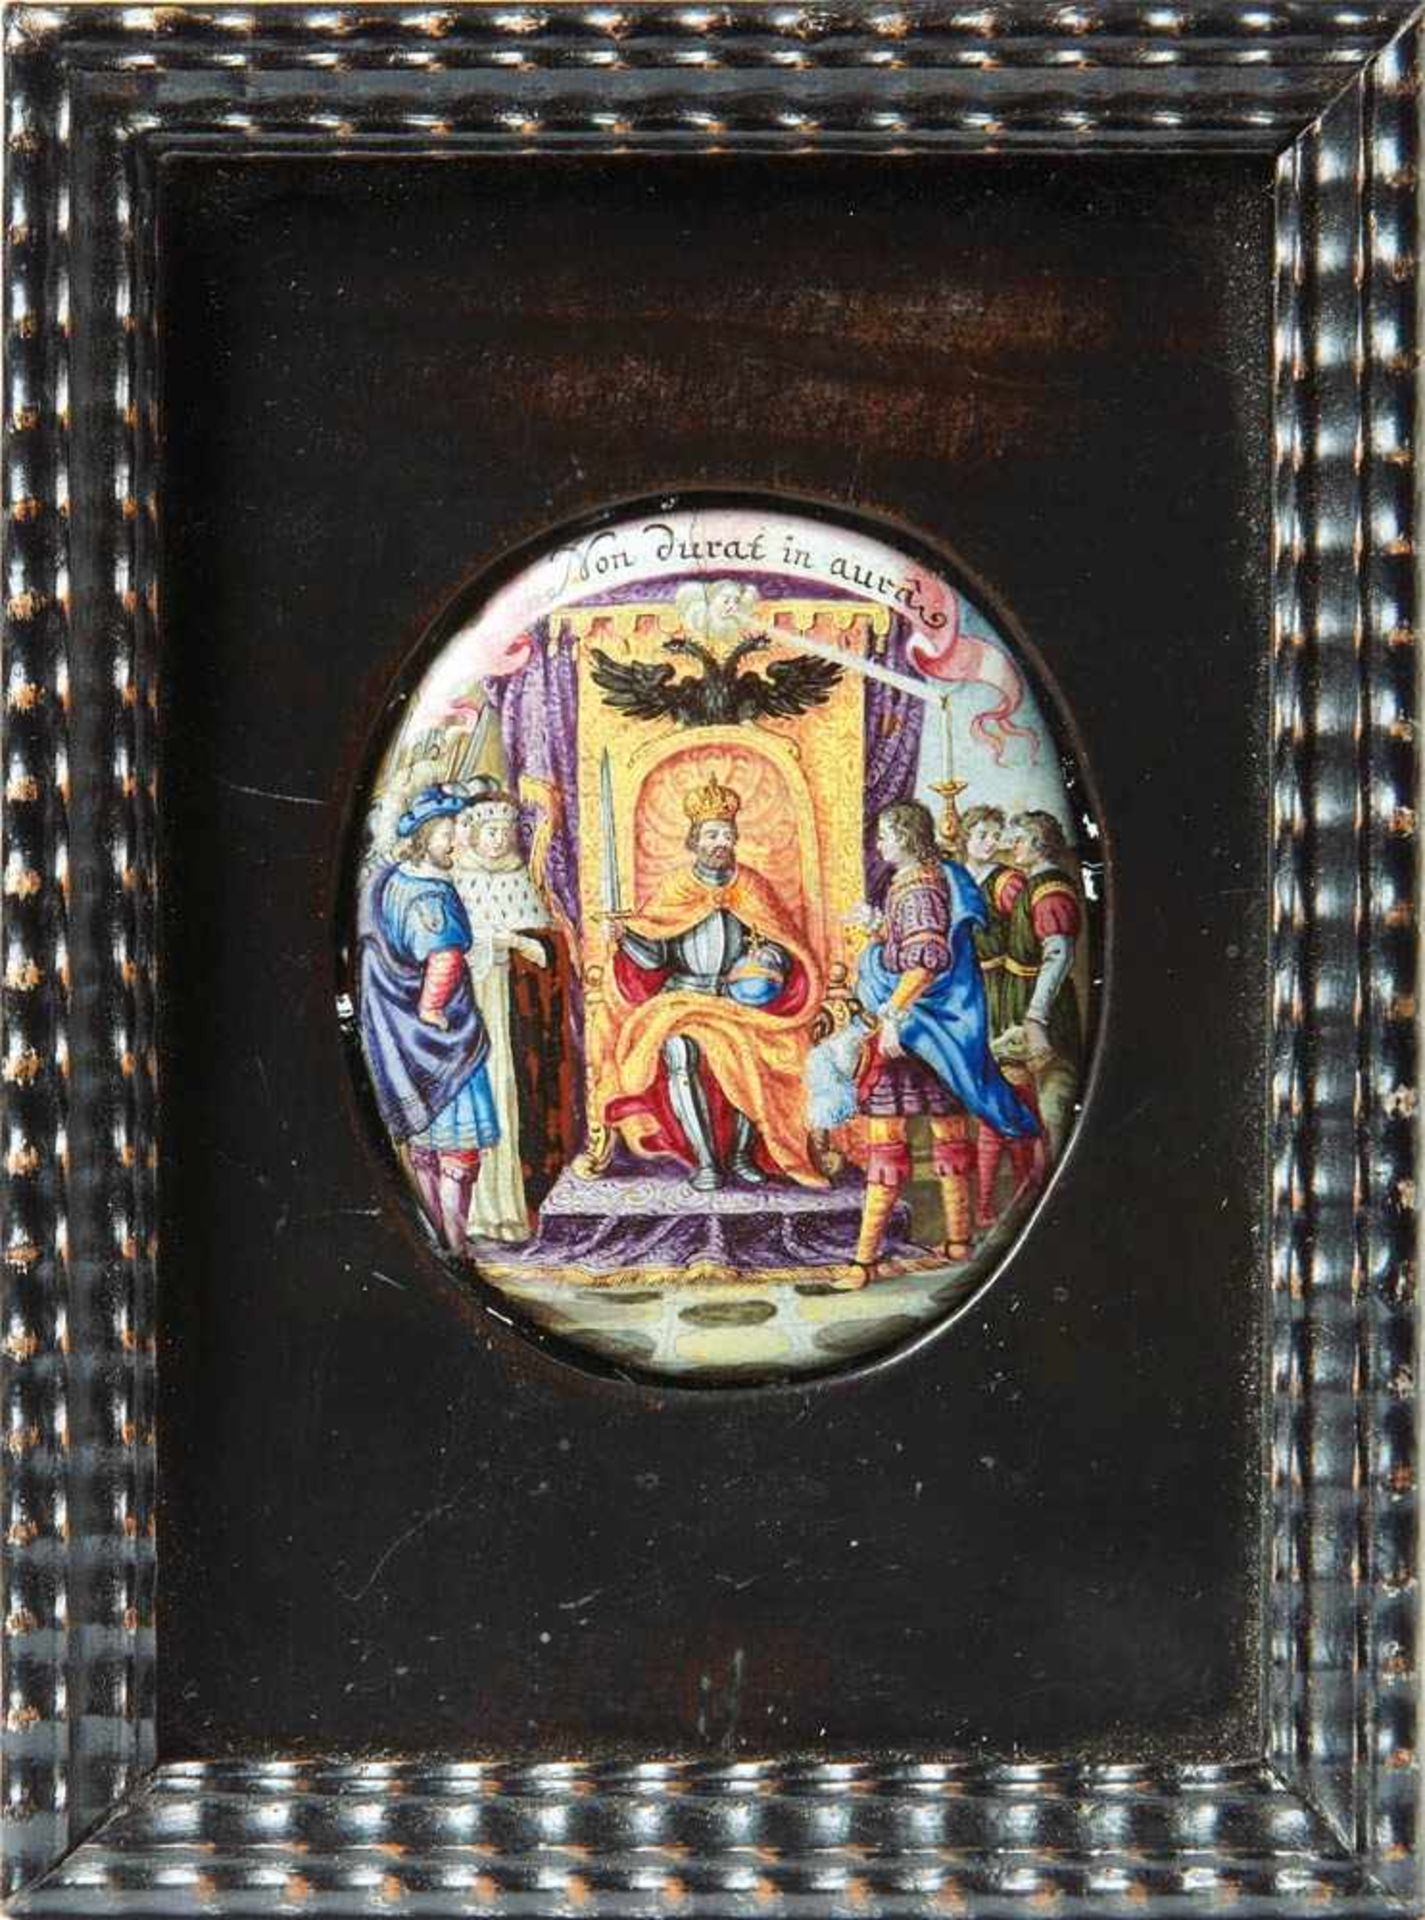 Enamel badgeVienna, 17th centuryOval picture detail with multi-figure representation of a throne